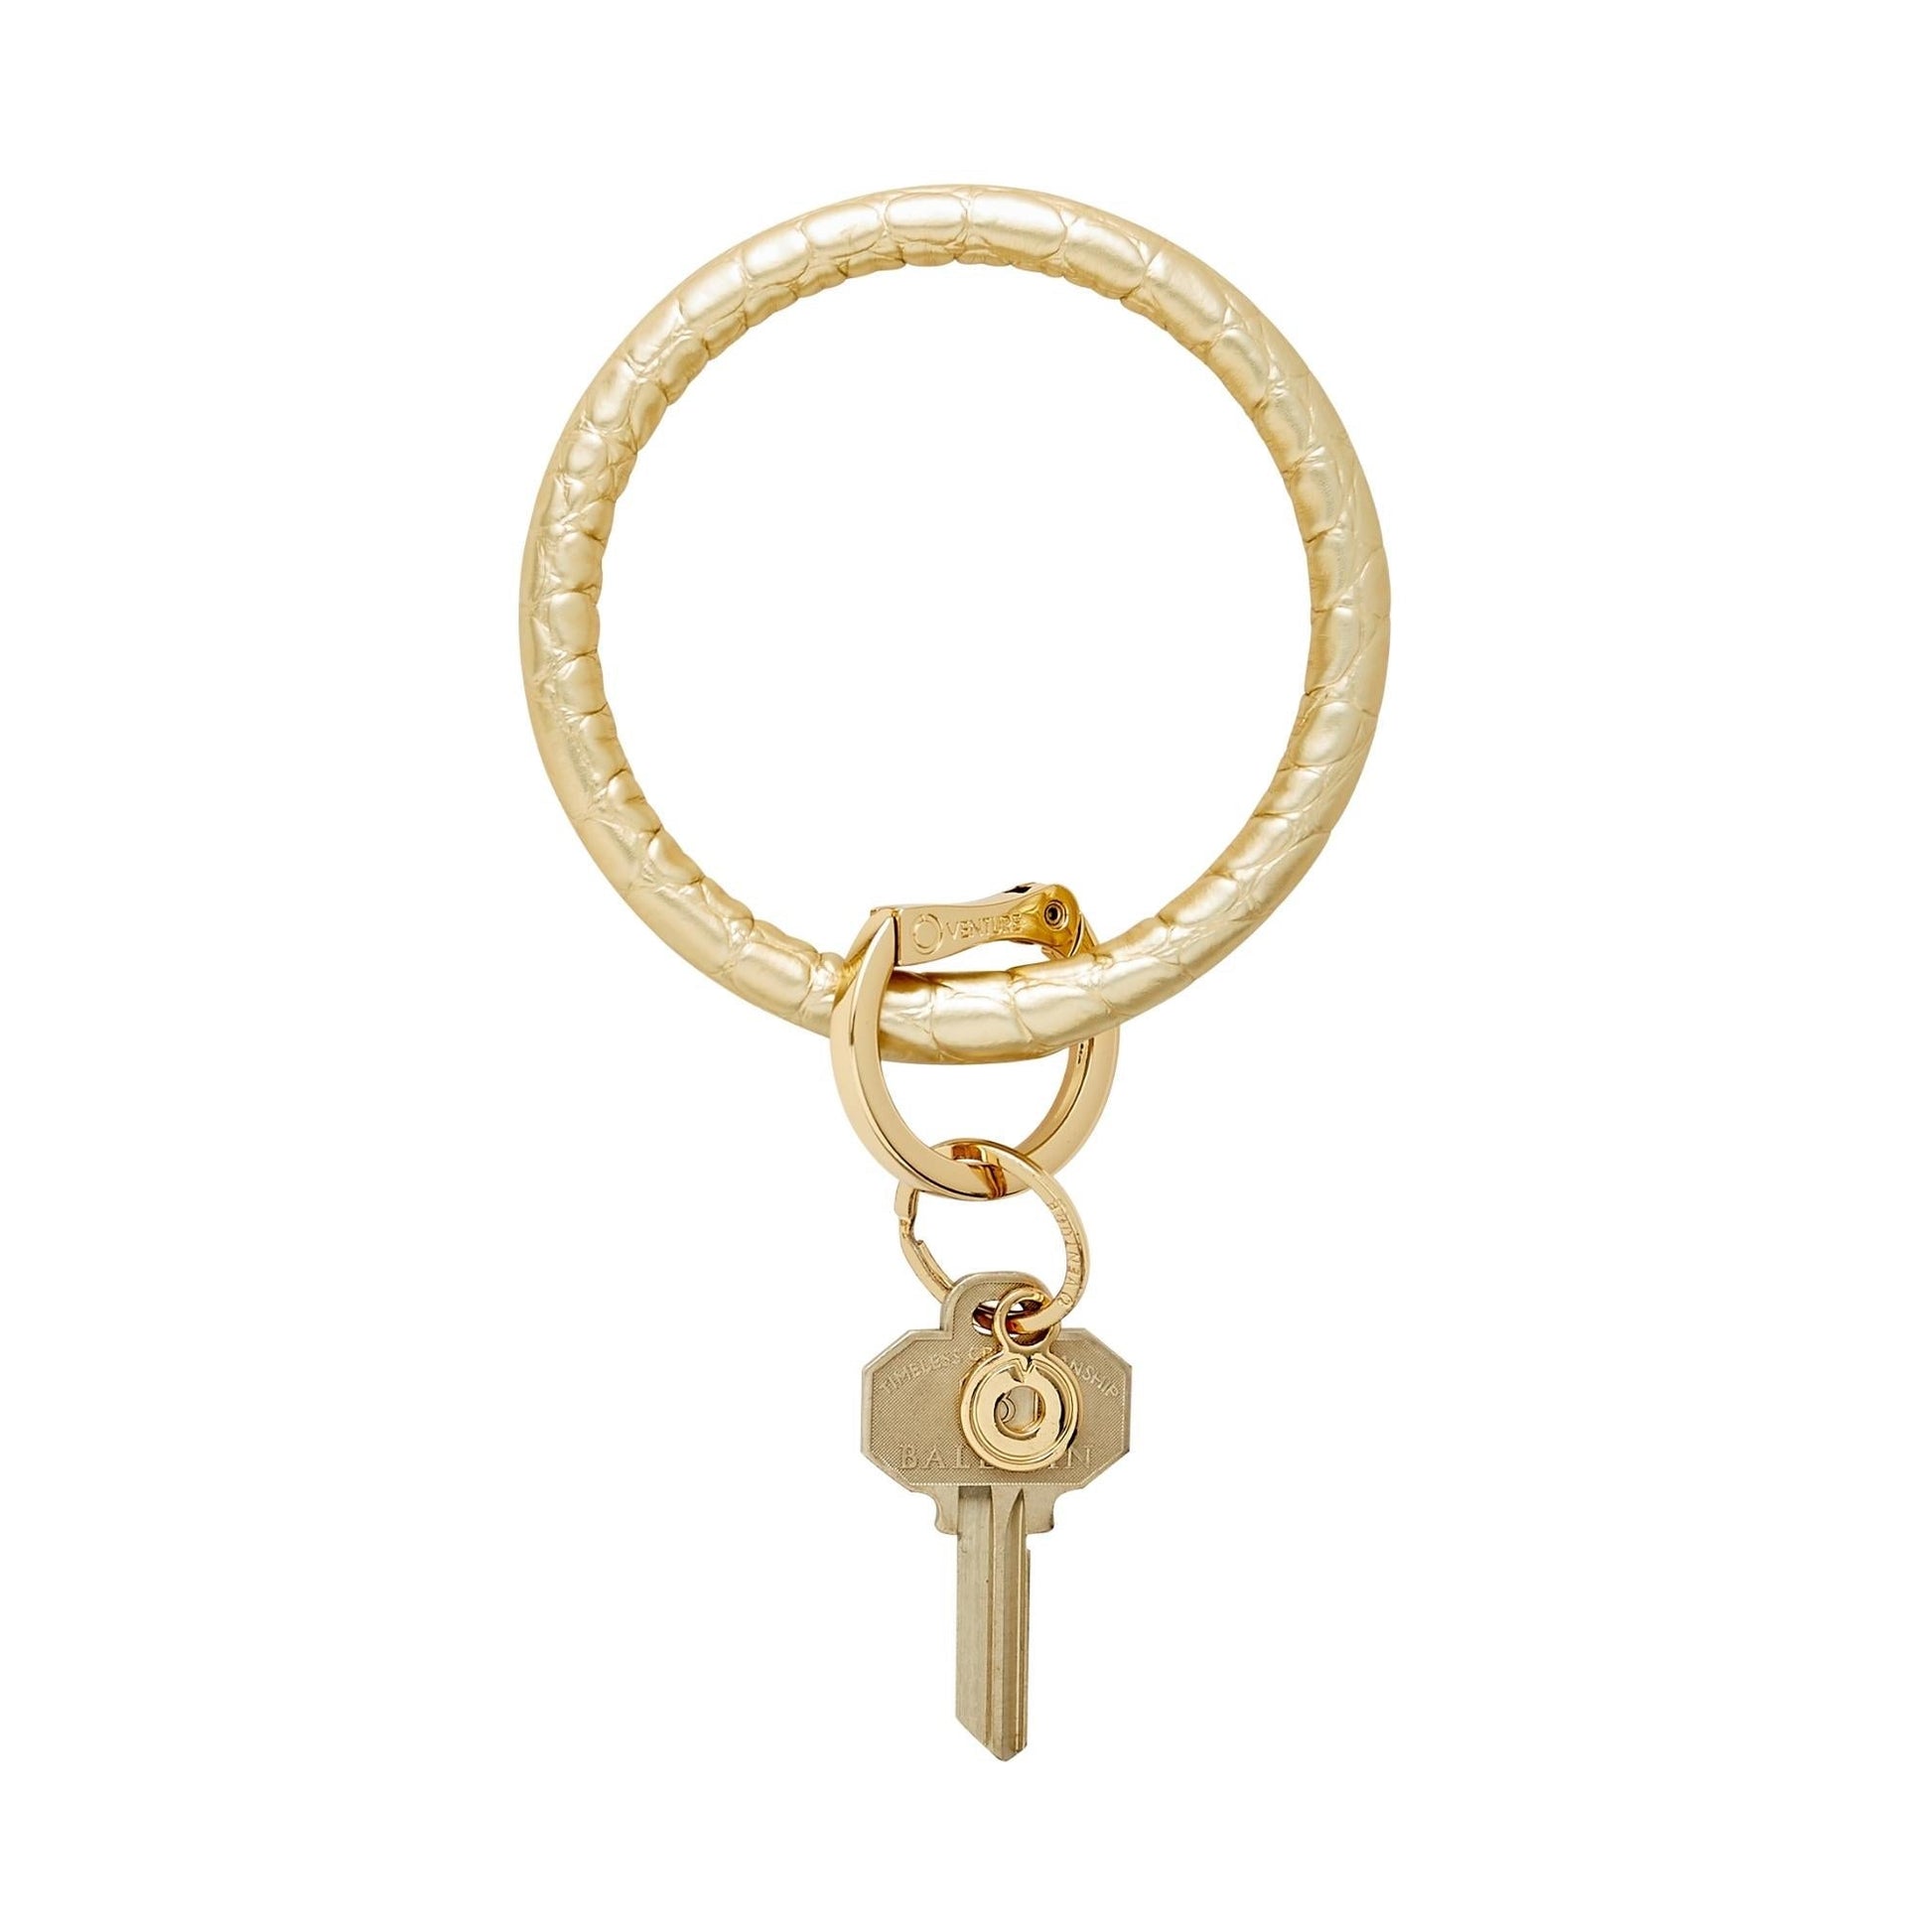 Shop for and Buy Tamper Proof Key Ring 4 Inch Diameter at Keyring